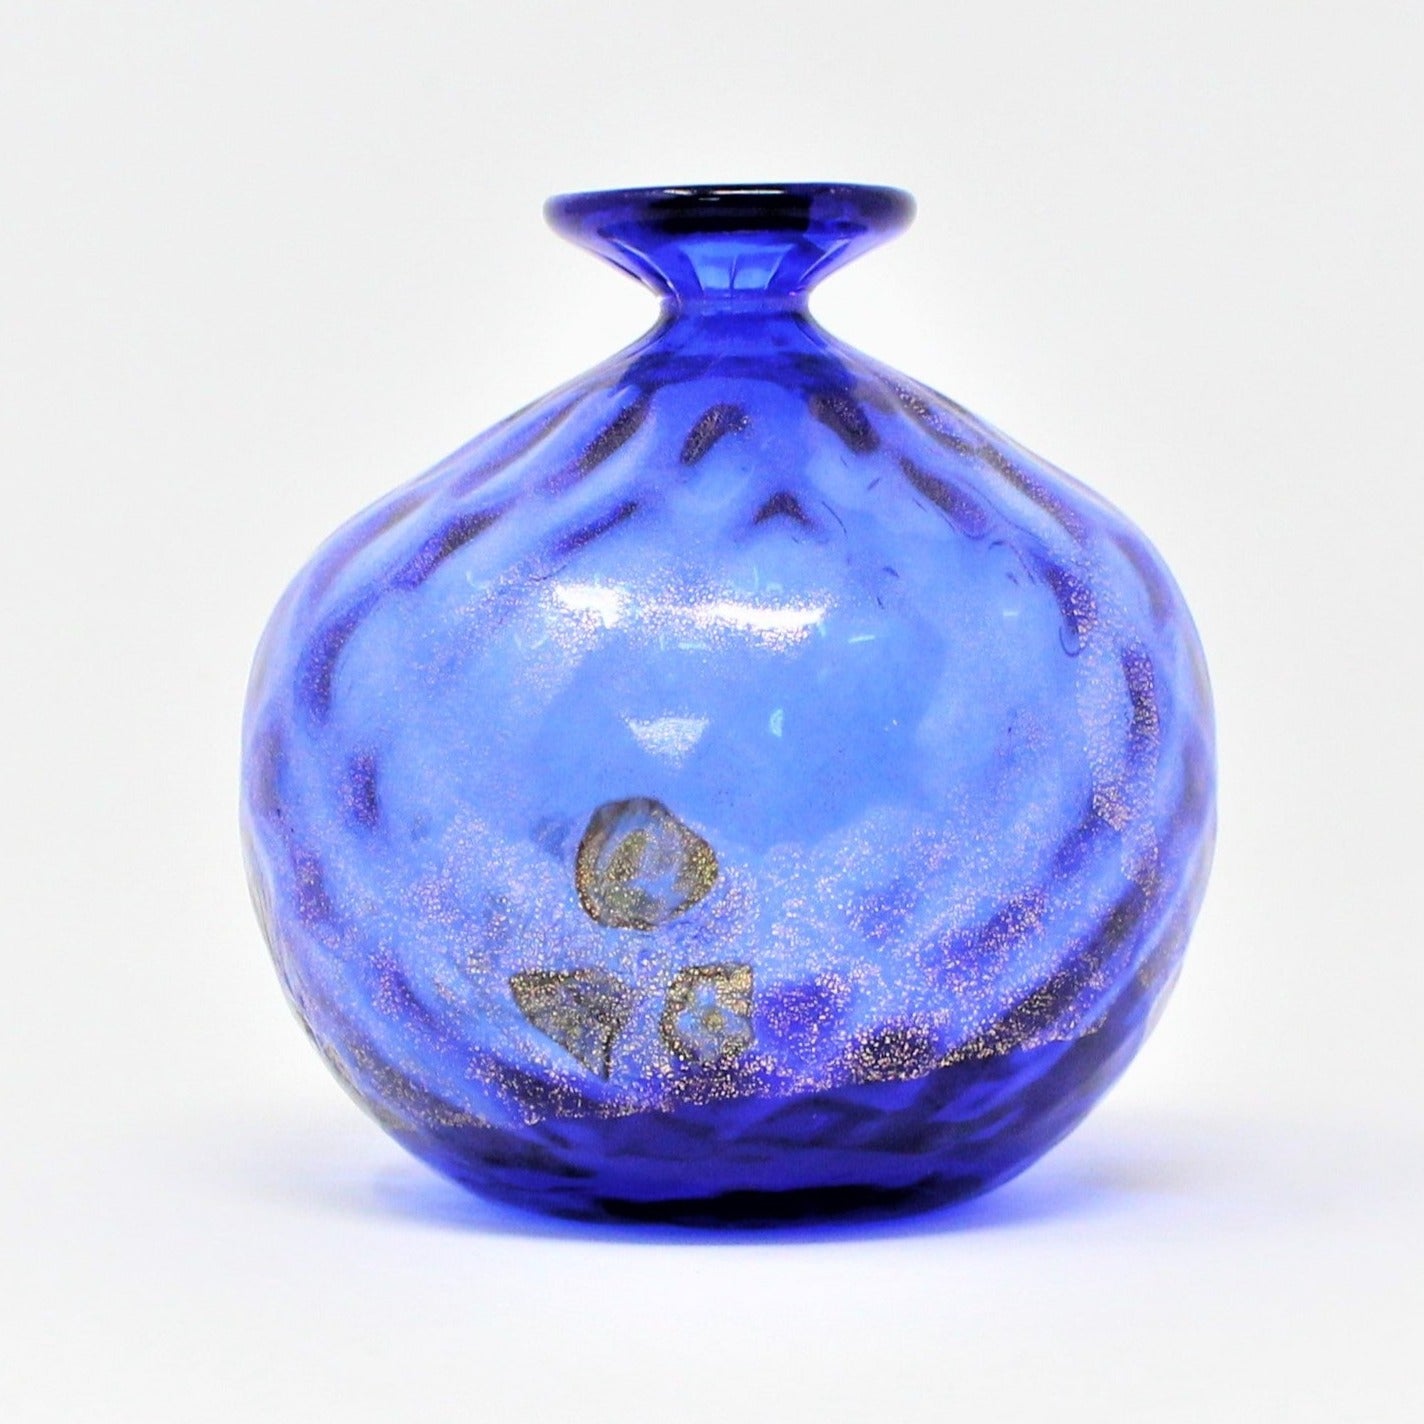 Bud Vase, Murano, Hand Blown, Cobalt Blue with Gold Leaf & Embossing, RARE, Vintage